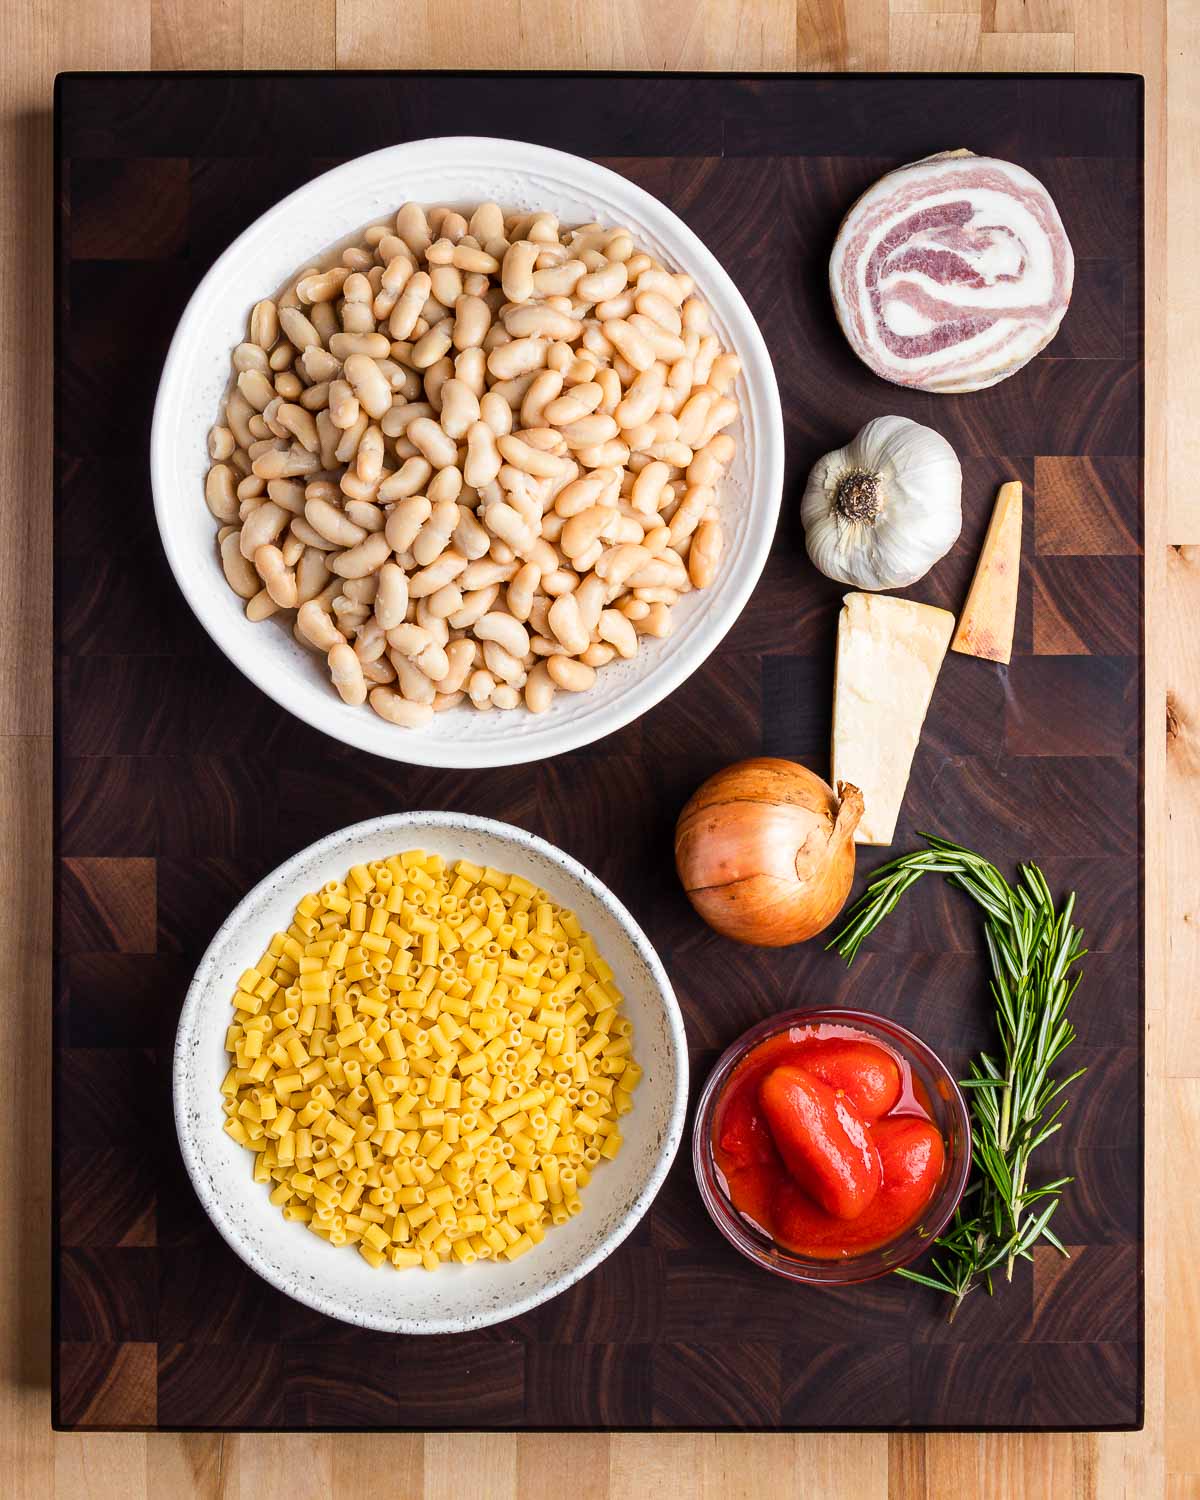 Ingredients shown: cannellini beans, pancetta, garlic, Parmigiano rinds, onion, ditalini pasta, plum tomatoes, and rosemary sprig.